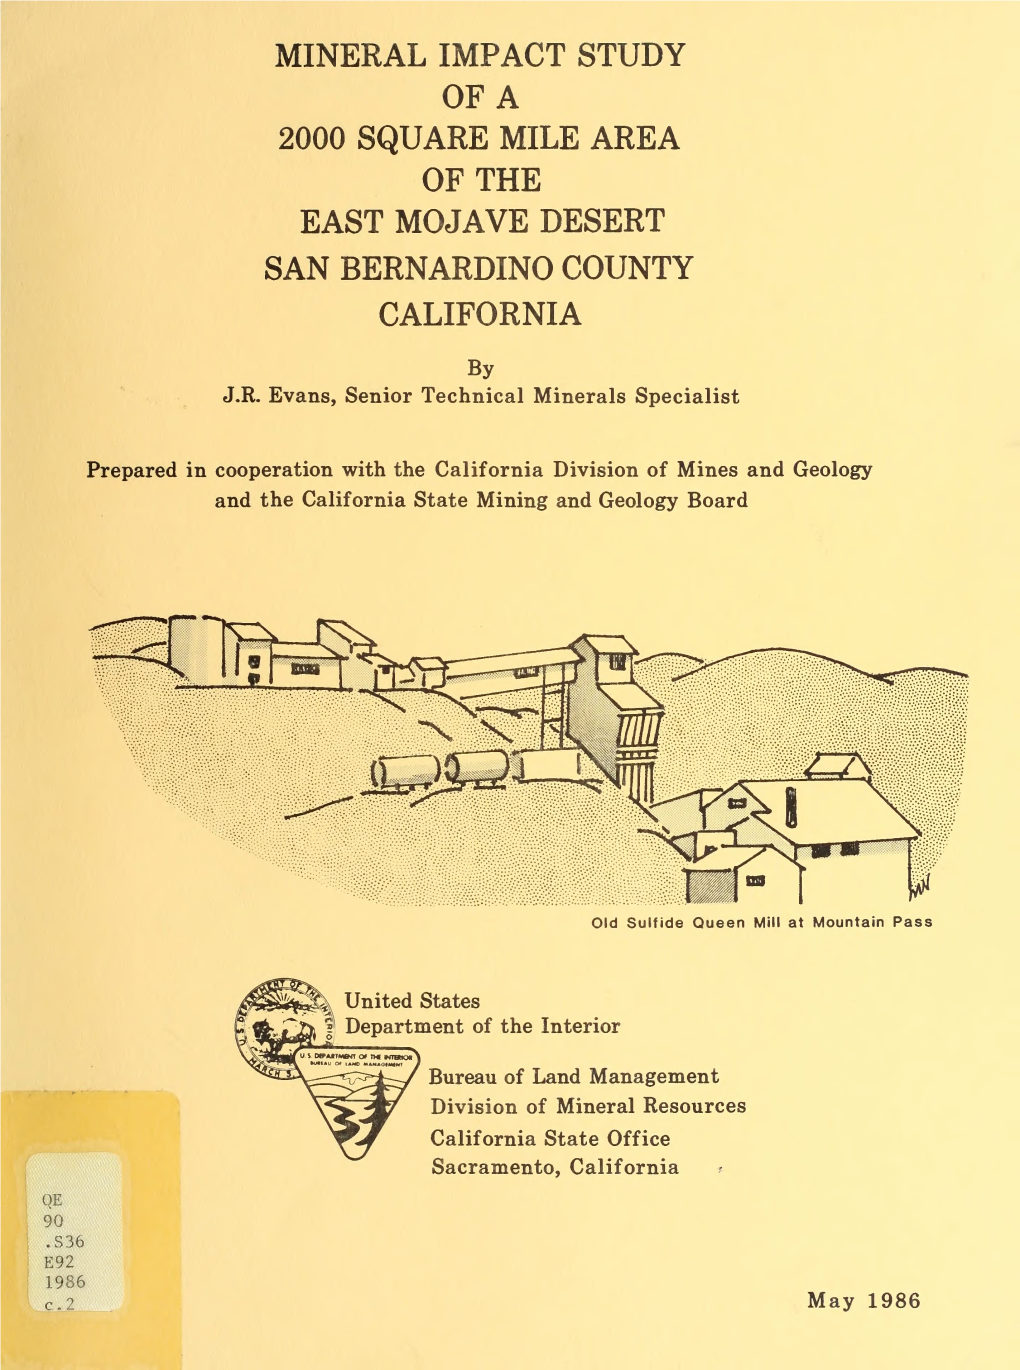 Mineral Impact Study of a 2,000 Square Mile Area of the East Mojave